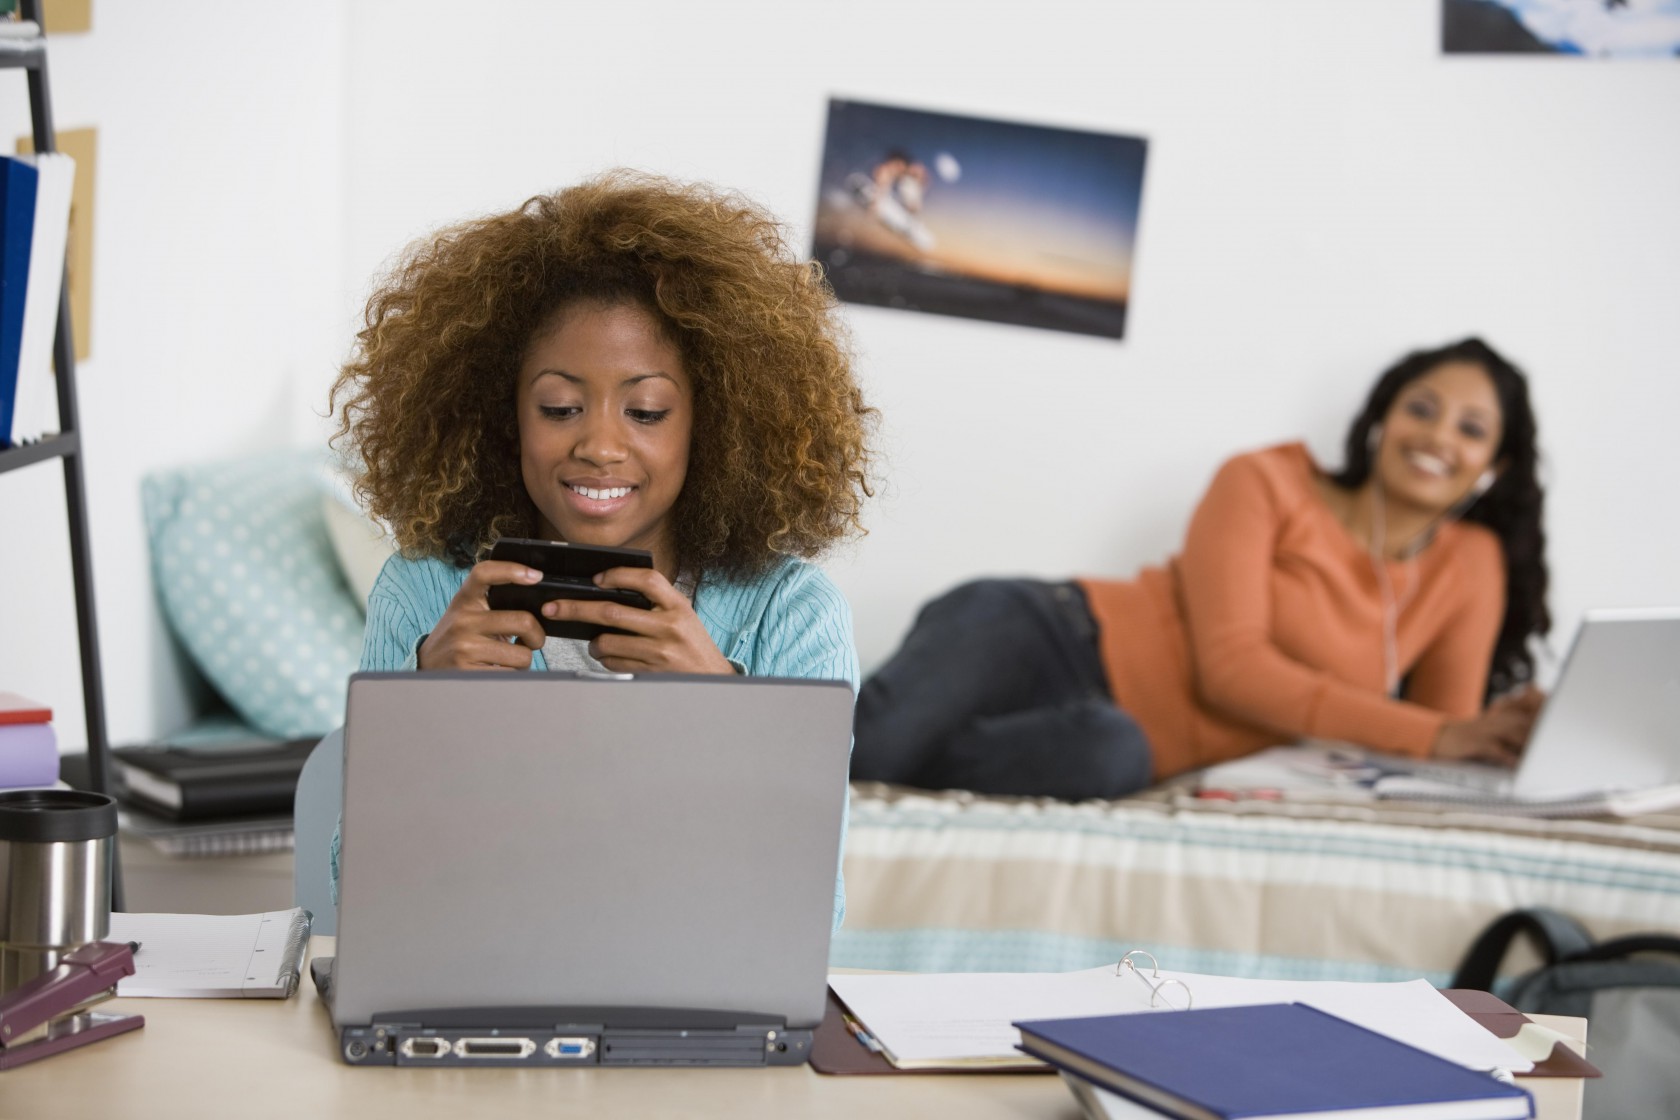 Women using laptops and cell phone